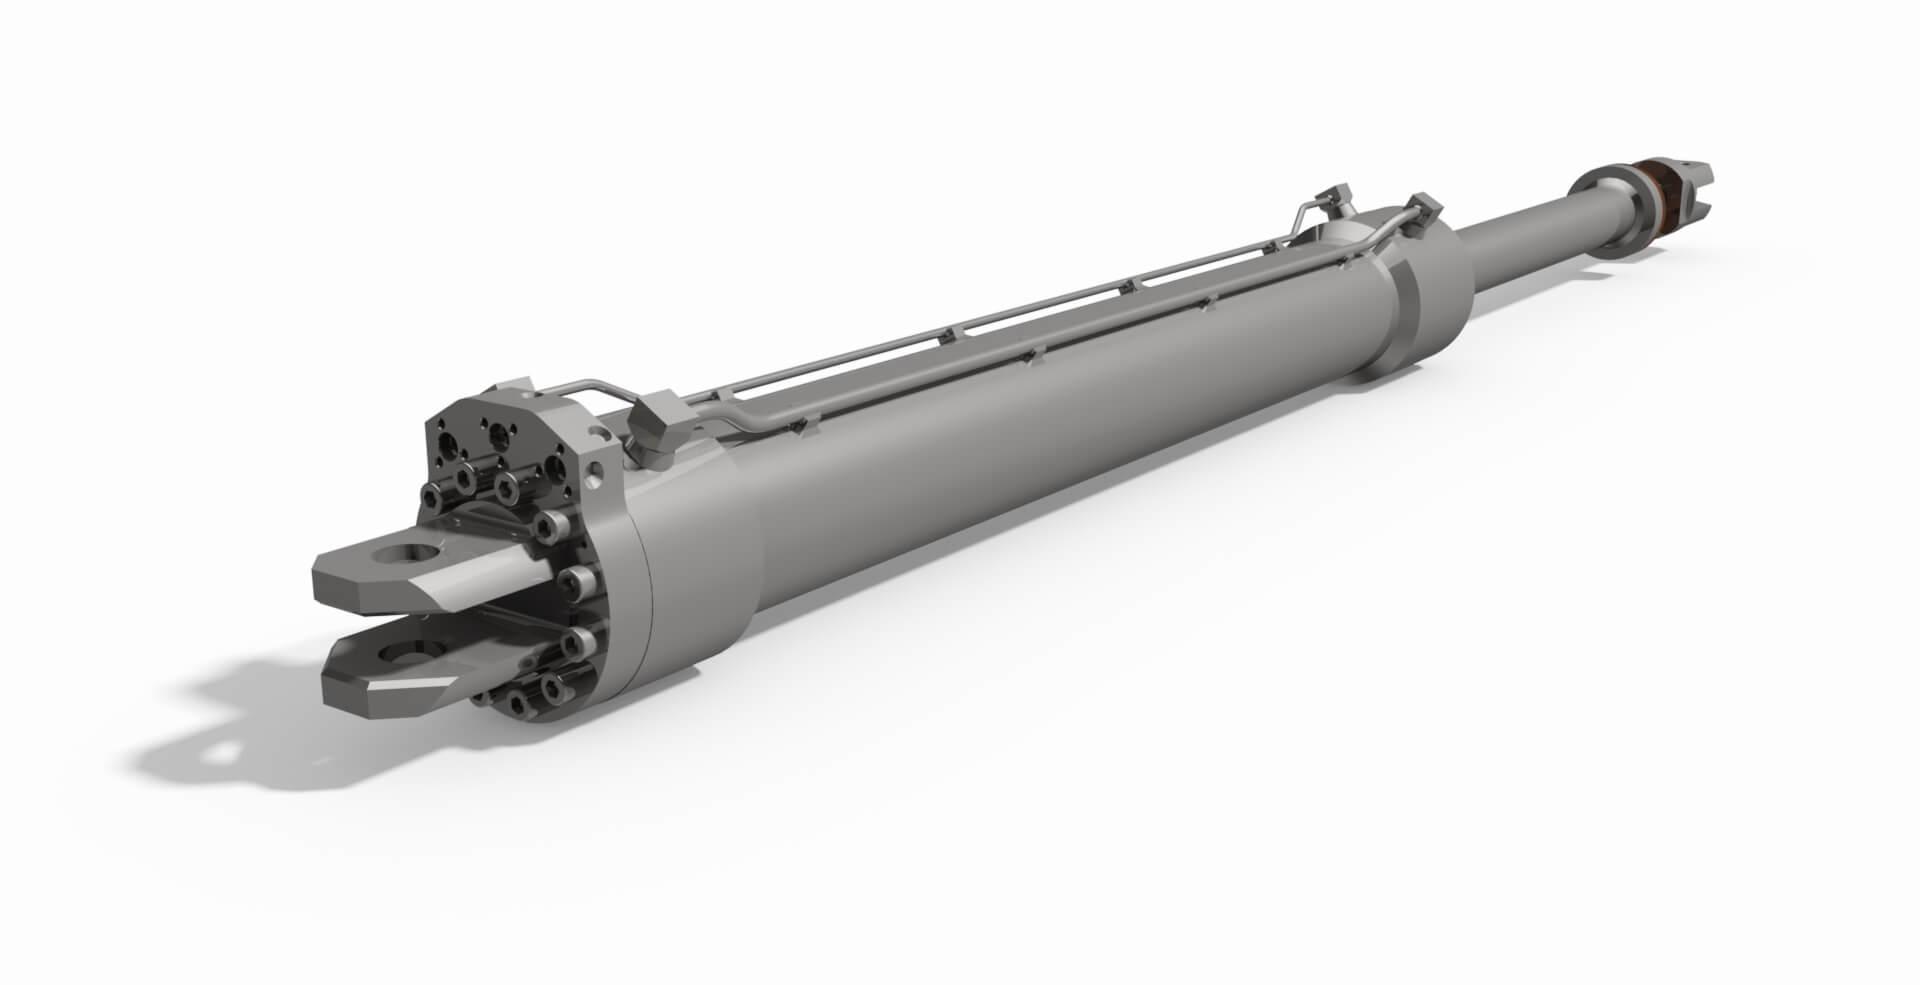 Custom hydraulic cylinder manufactured from nickel alloys for critical defense project